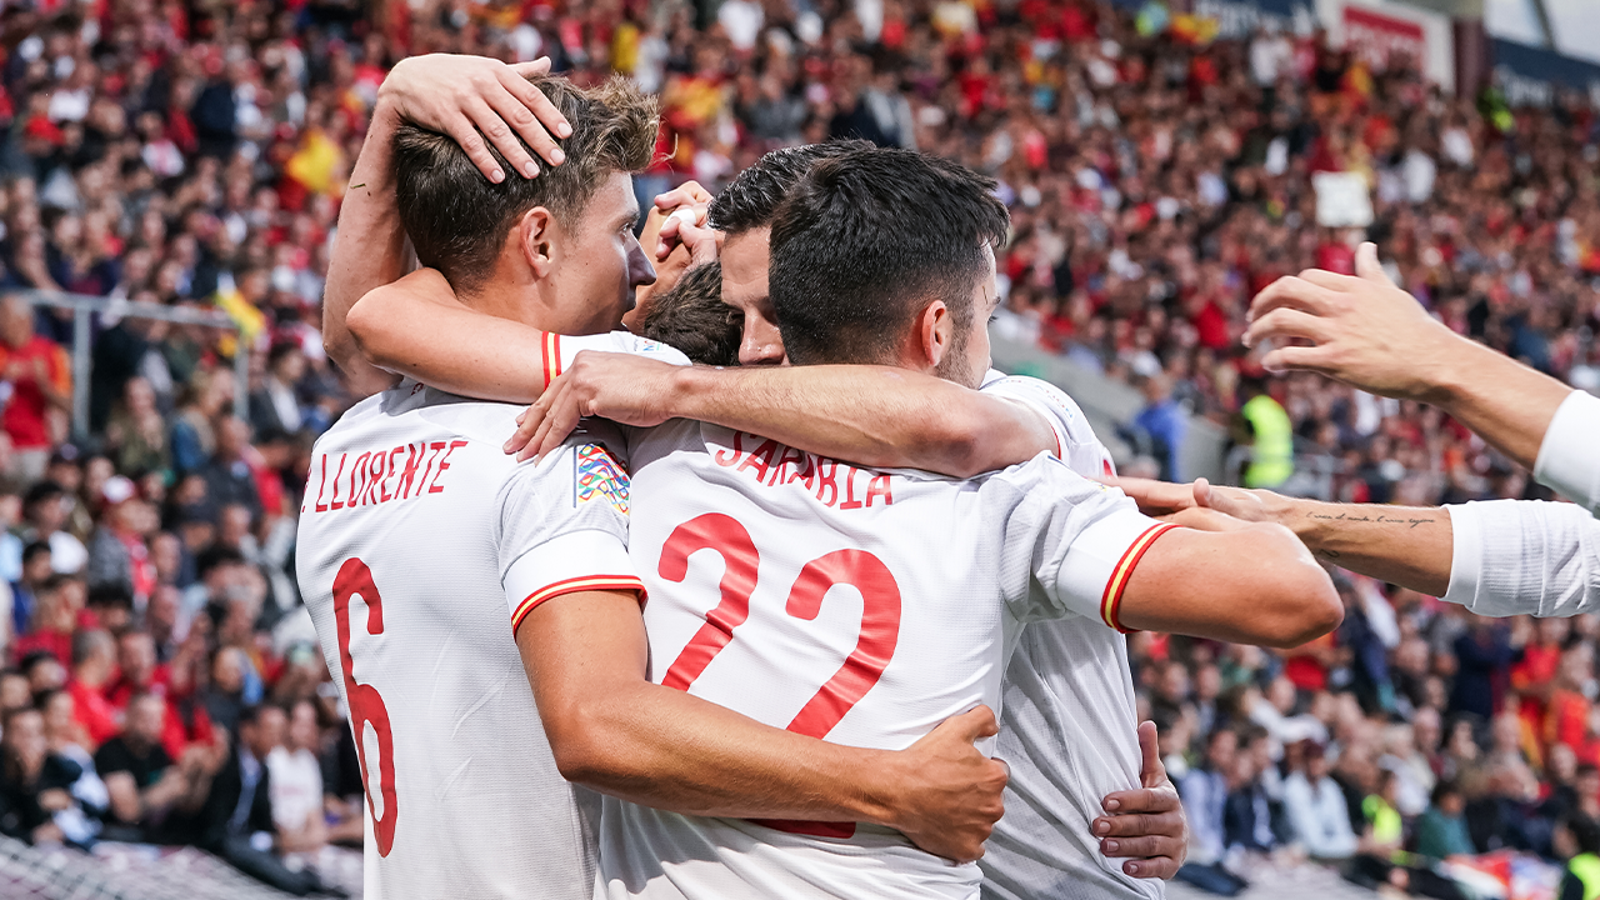 Marcos Llorente sets up Pablo Sarabia to give Spain a 1-0 lead over Switzerland